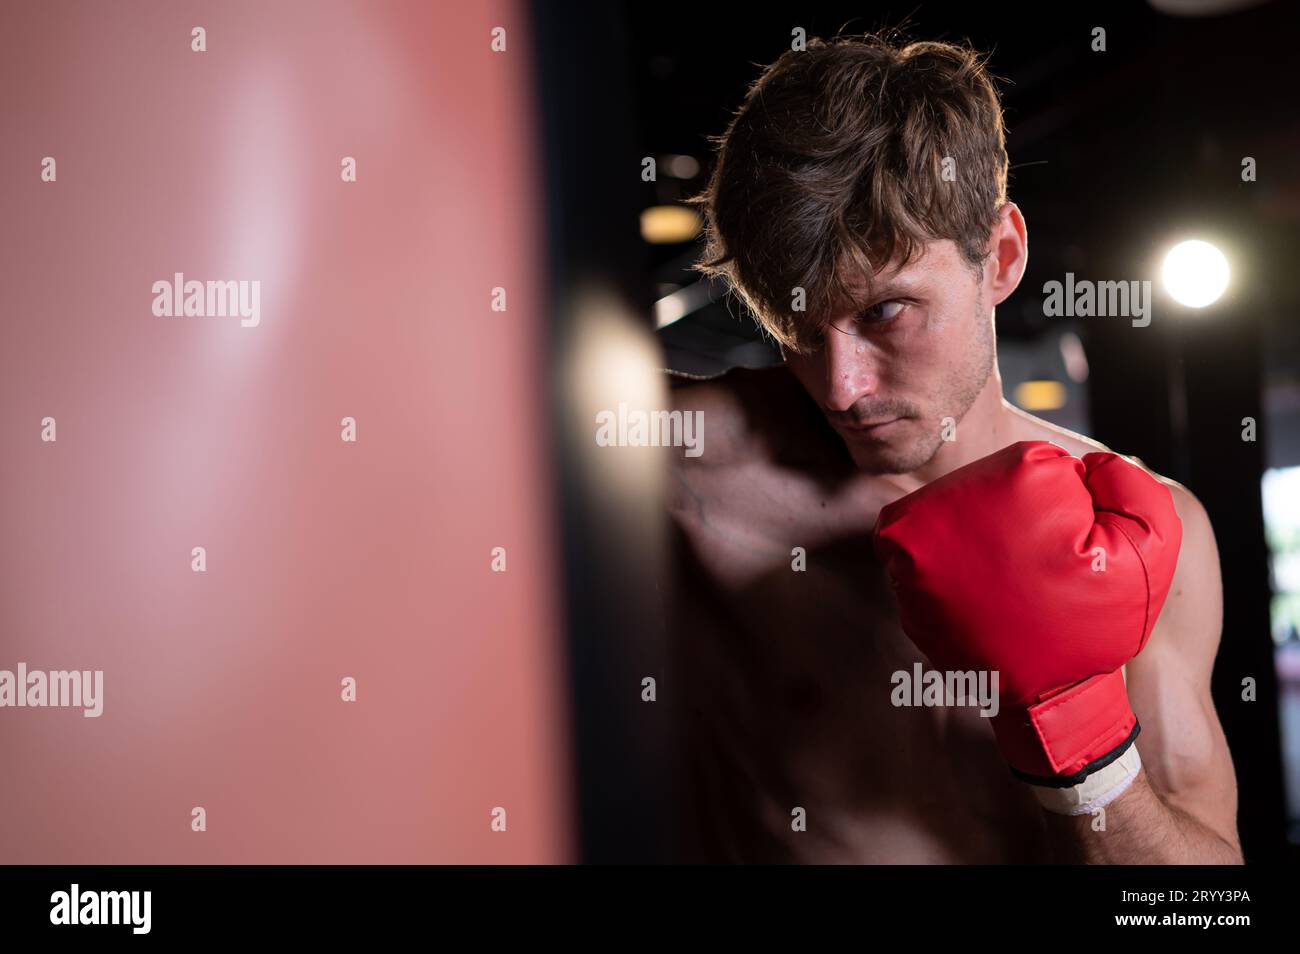 Portrait of boxers must practice their kicking and punching skills with punching bag. To build strength and power of kicking and Stock Photo